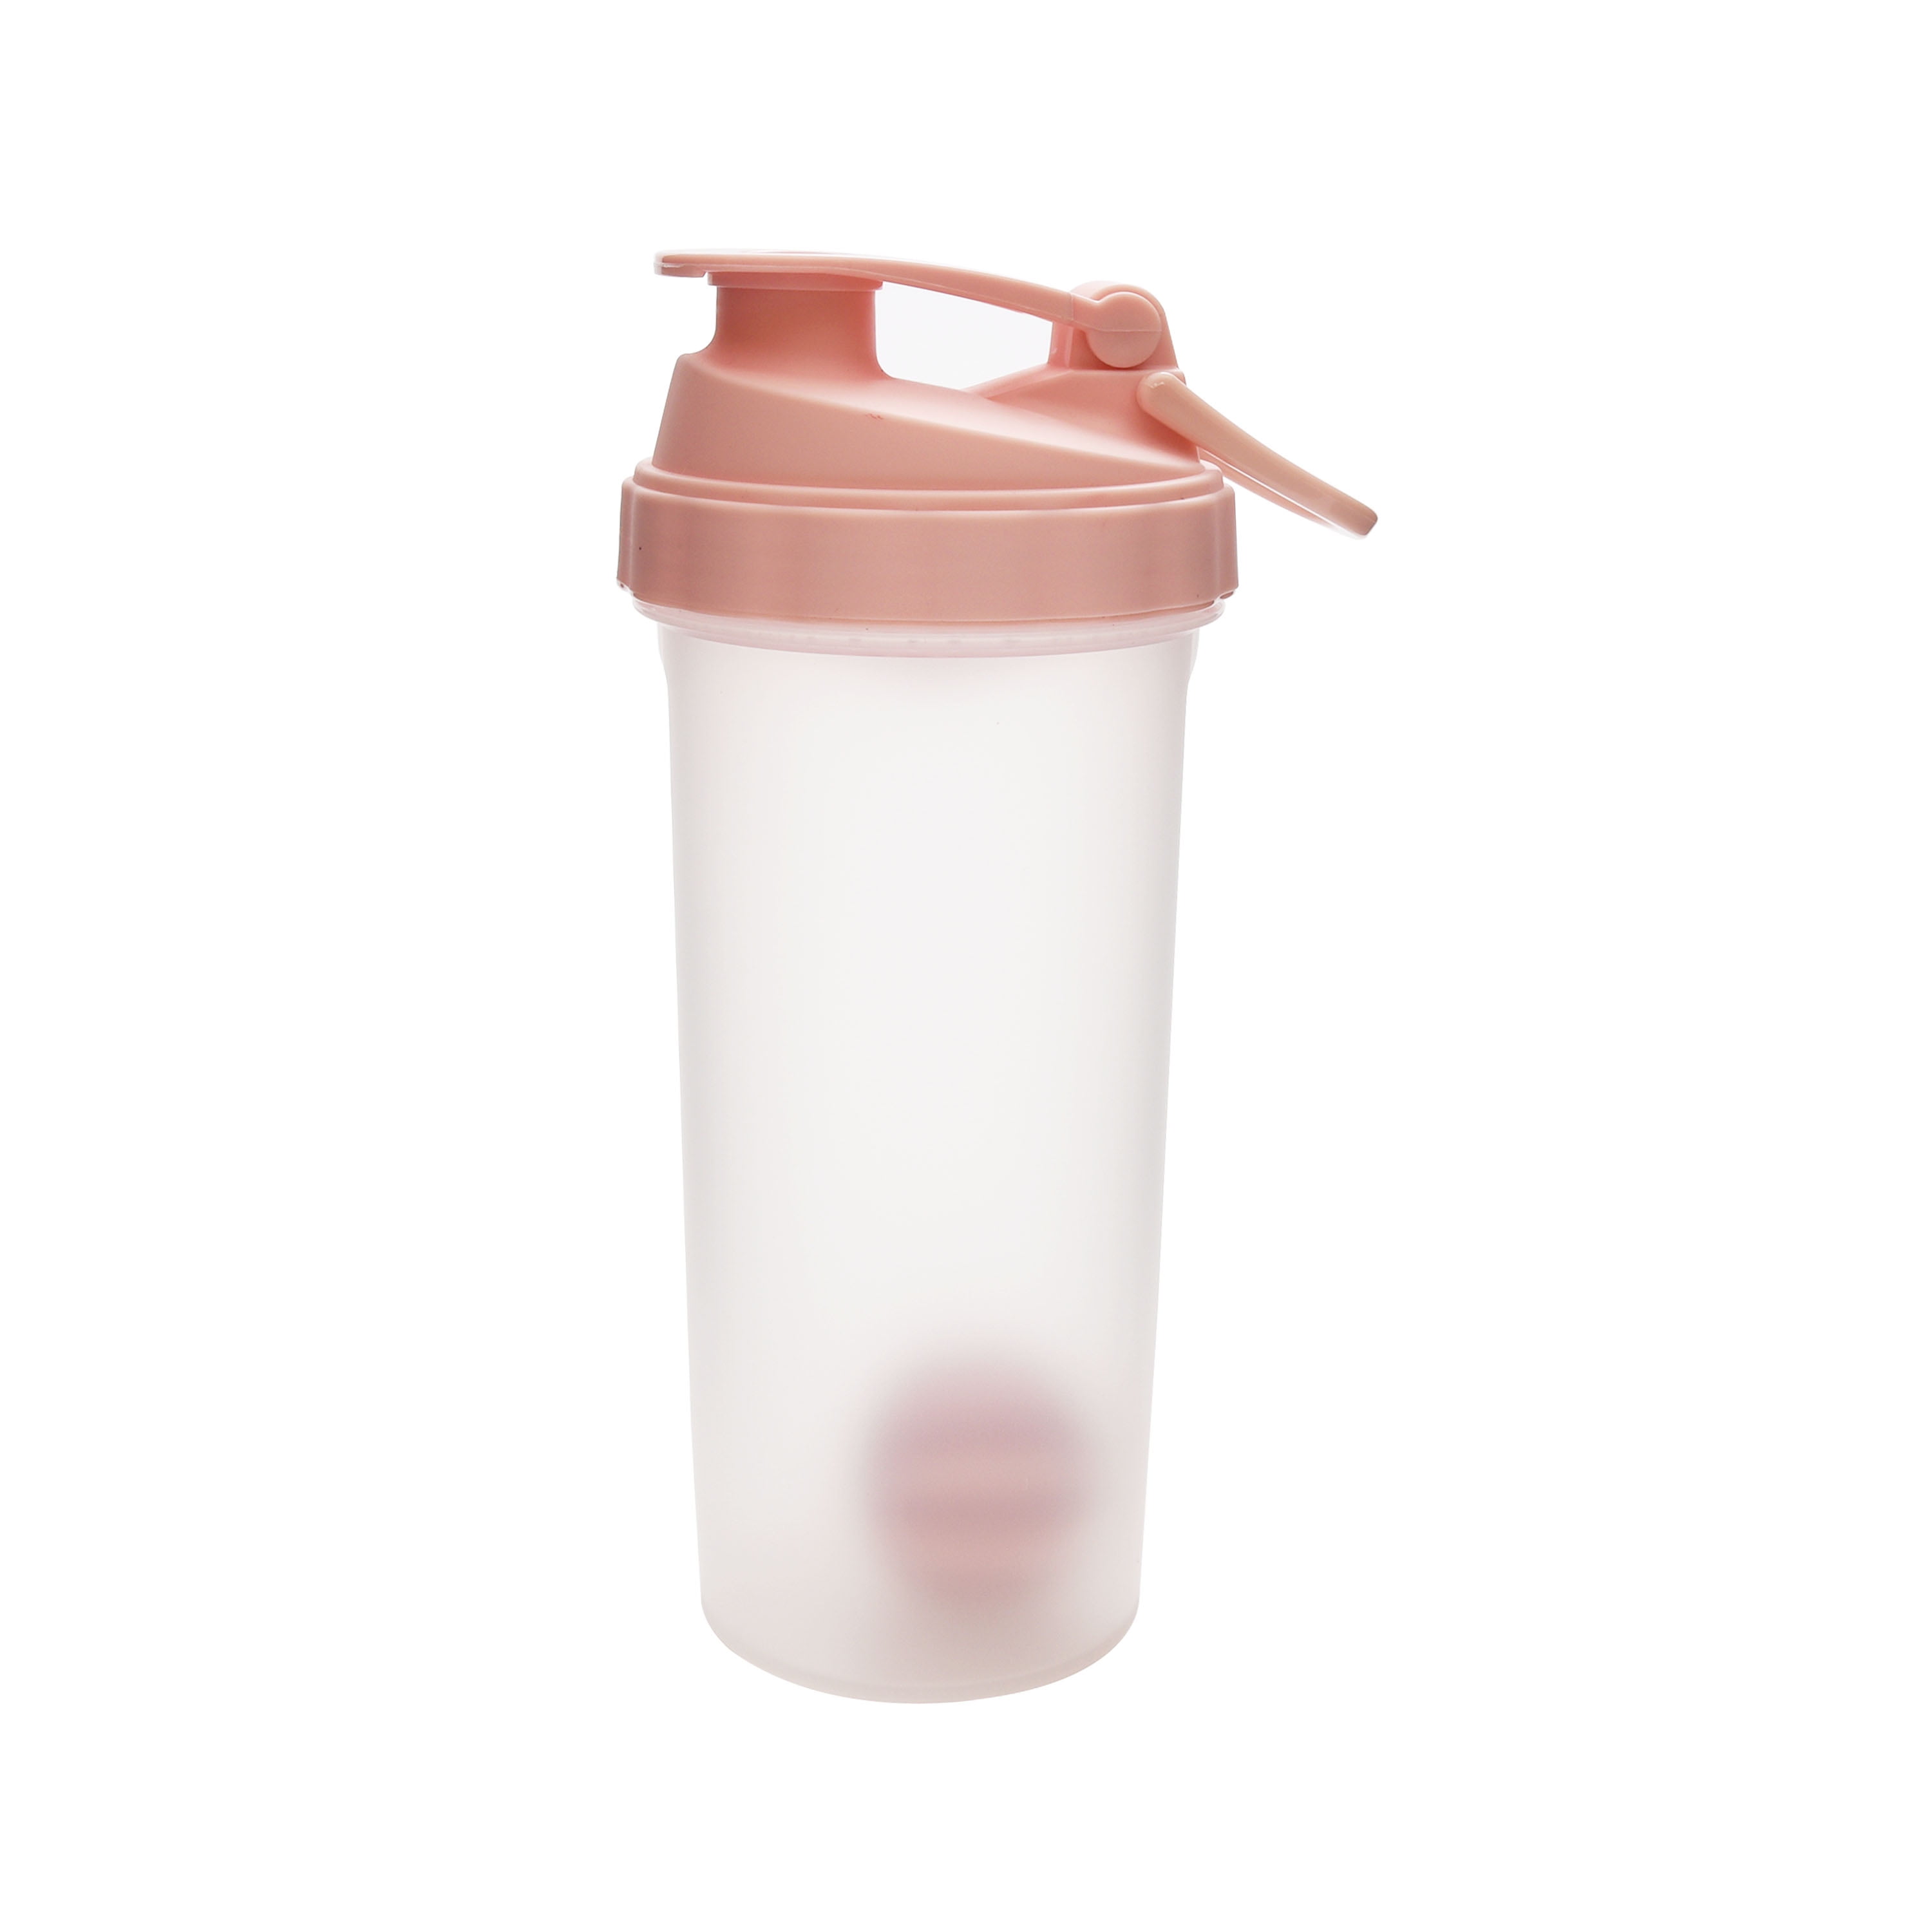 A Small Clear Shaker Bottle w. Pink Lid,12Oz/400ml Measurement Marks &  Stainless Whisk Blender Mixer…See more A Small Clear Shaker Bottle w. Pink